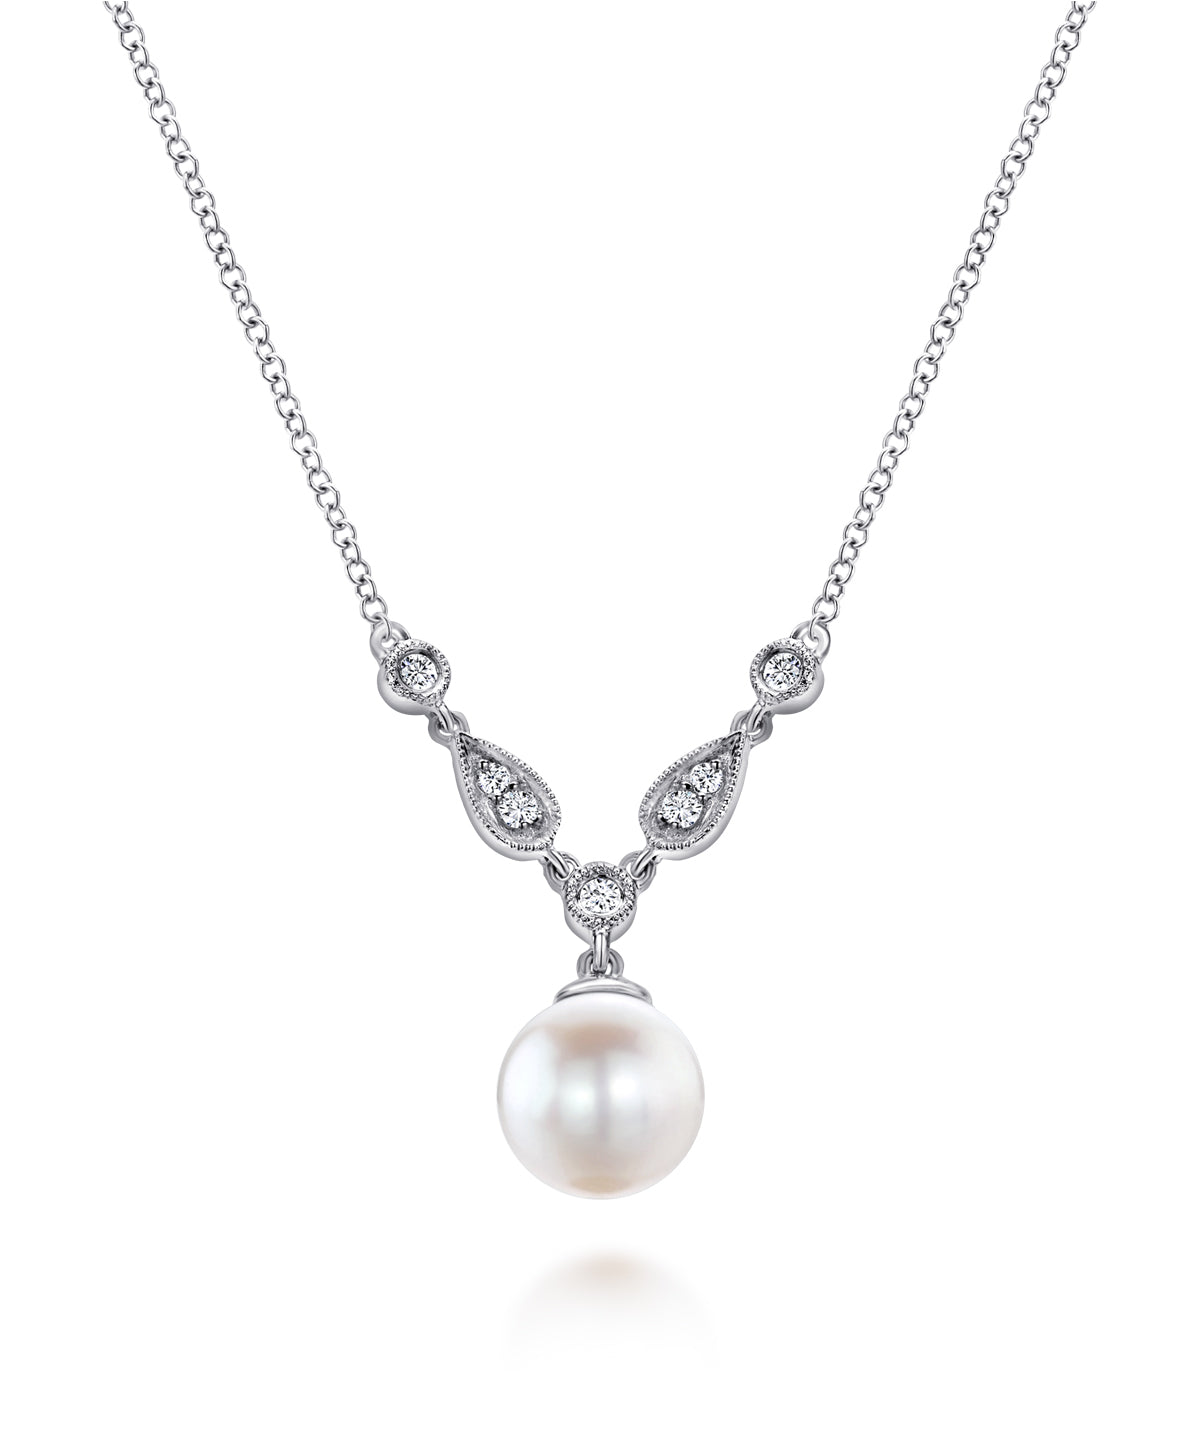 14K White Gold Cultured Pearl and Diamond Accent Necklace